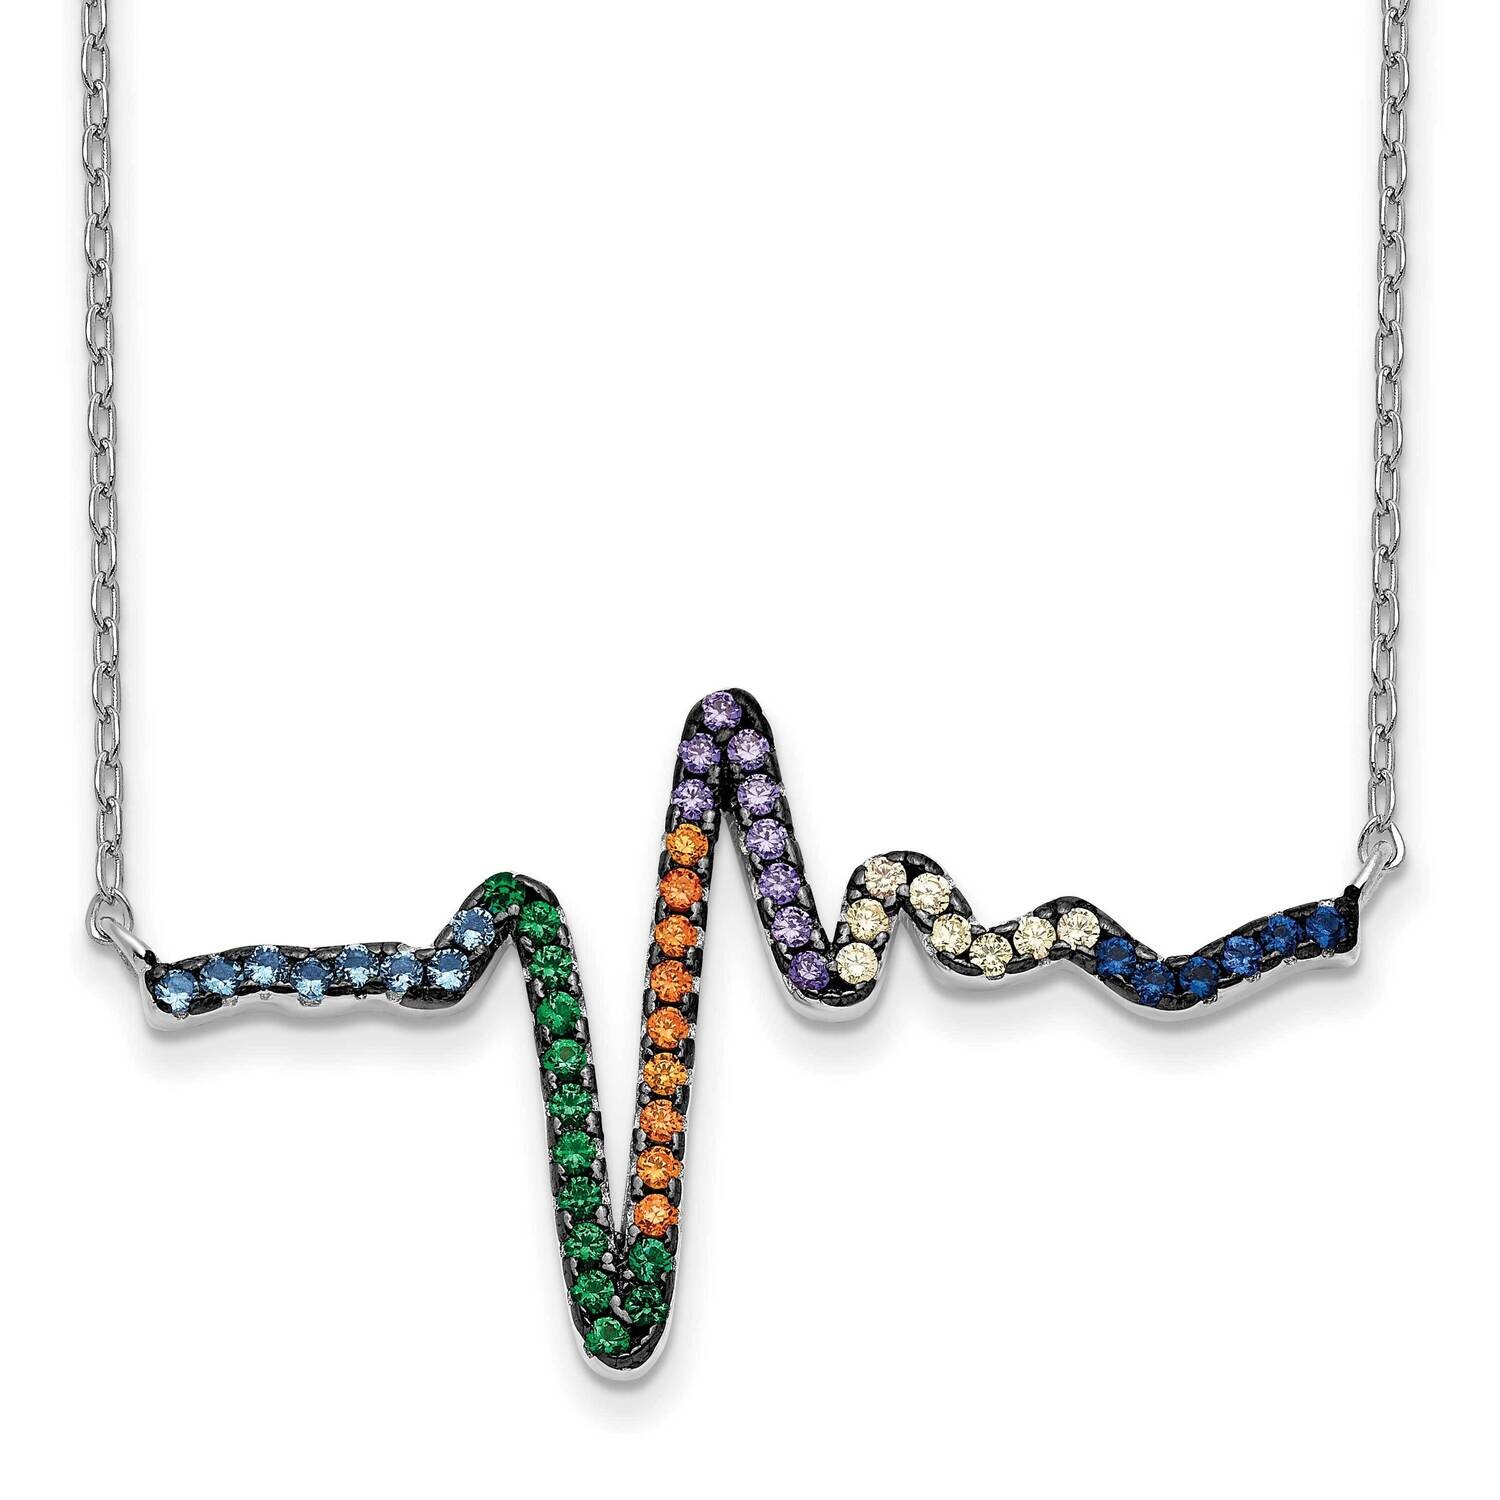 Prizma 18 Inch Clasp Colorful CZ Heartbeat Necklace 1 Inch Extender Sterling Silver Rhodium-Plated QG5705-18